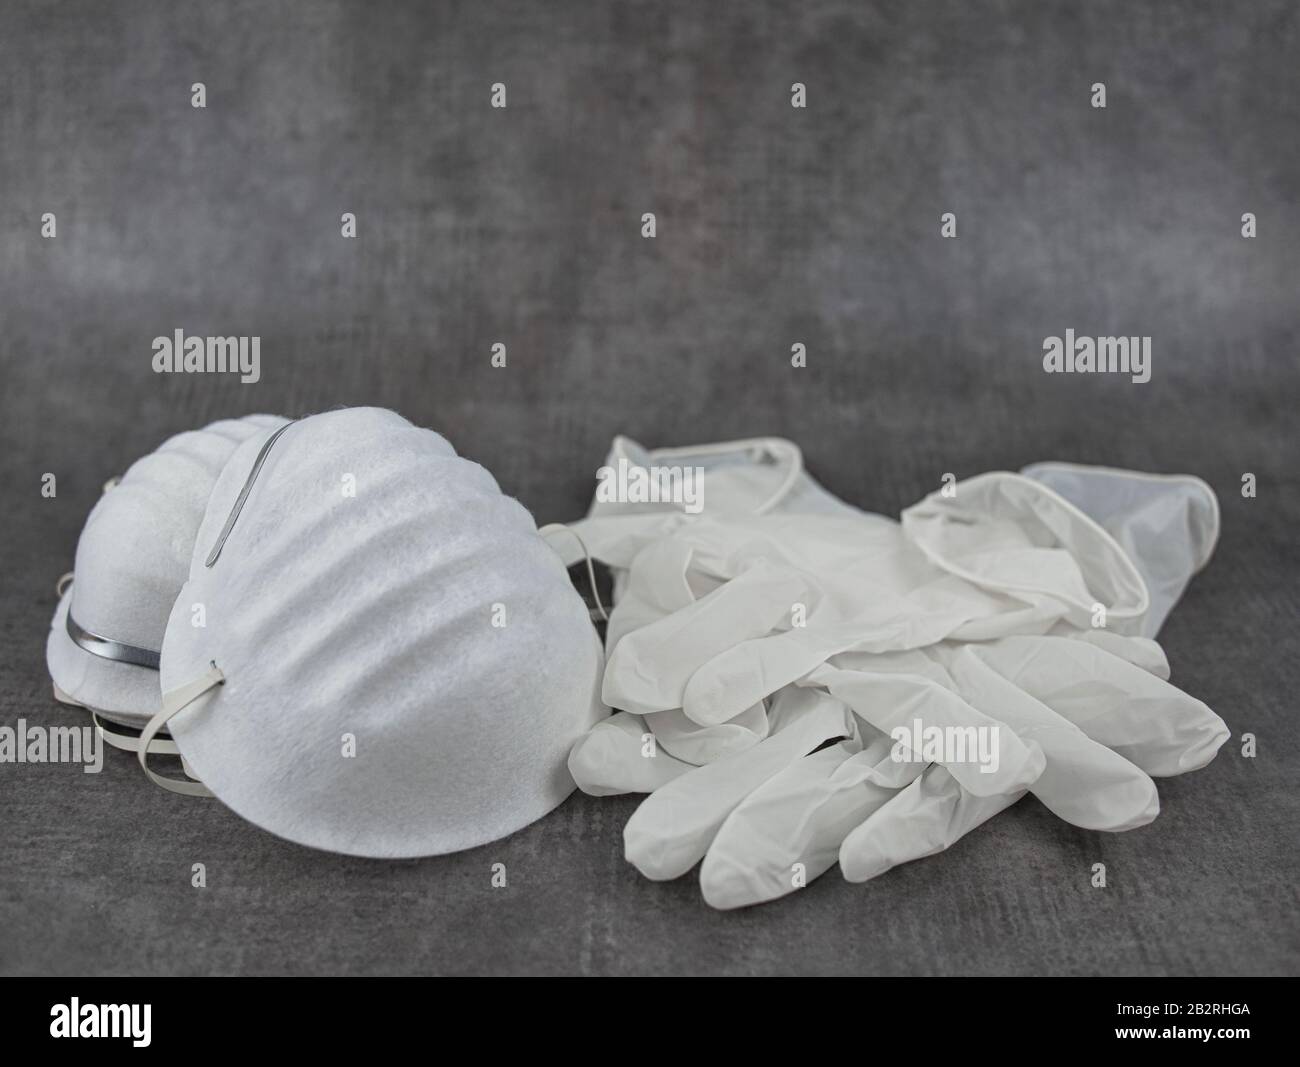 Breathing masks with elastic band and several disposable latex gloves Stock Photo